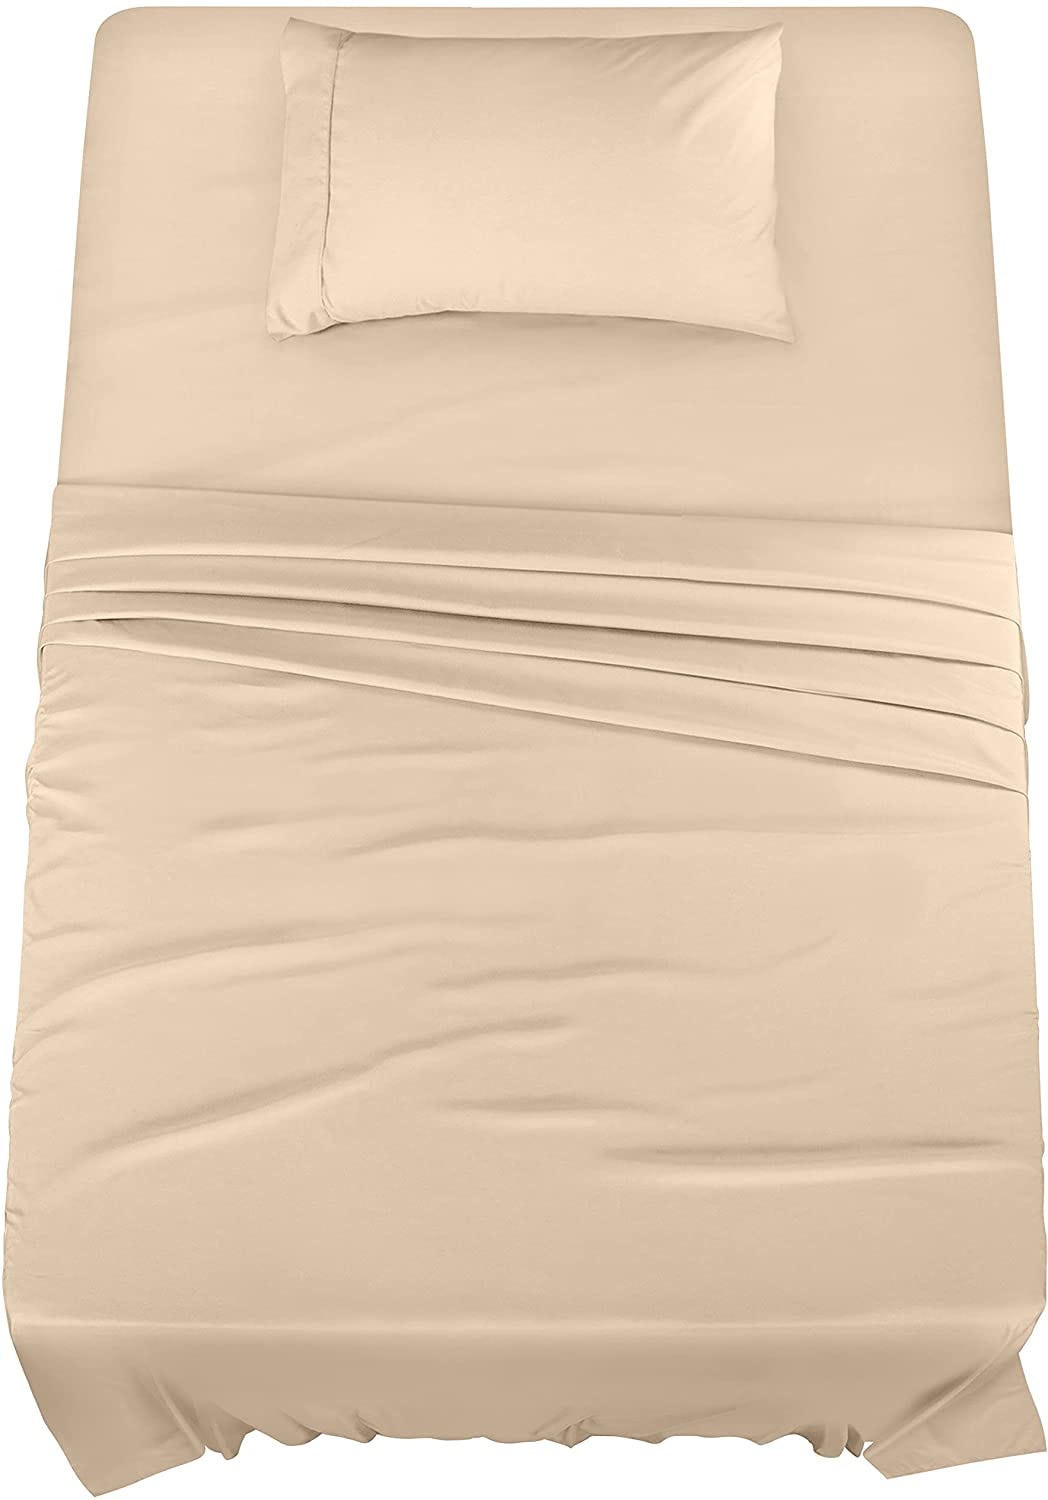 Utopia Bedding Twin Bed Sheets Set — 3 Piece Bedding — Brushed Microfiber —  Shrinkage and Fade Resistant — Easy Care (Twin, Beige), by Zohaib1